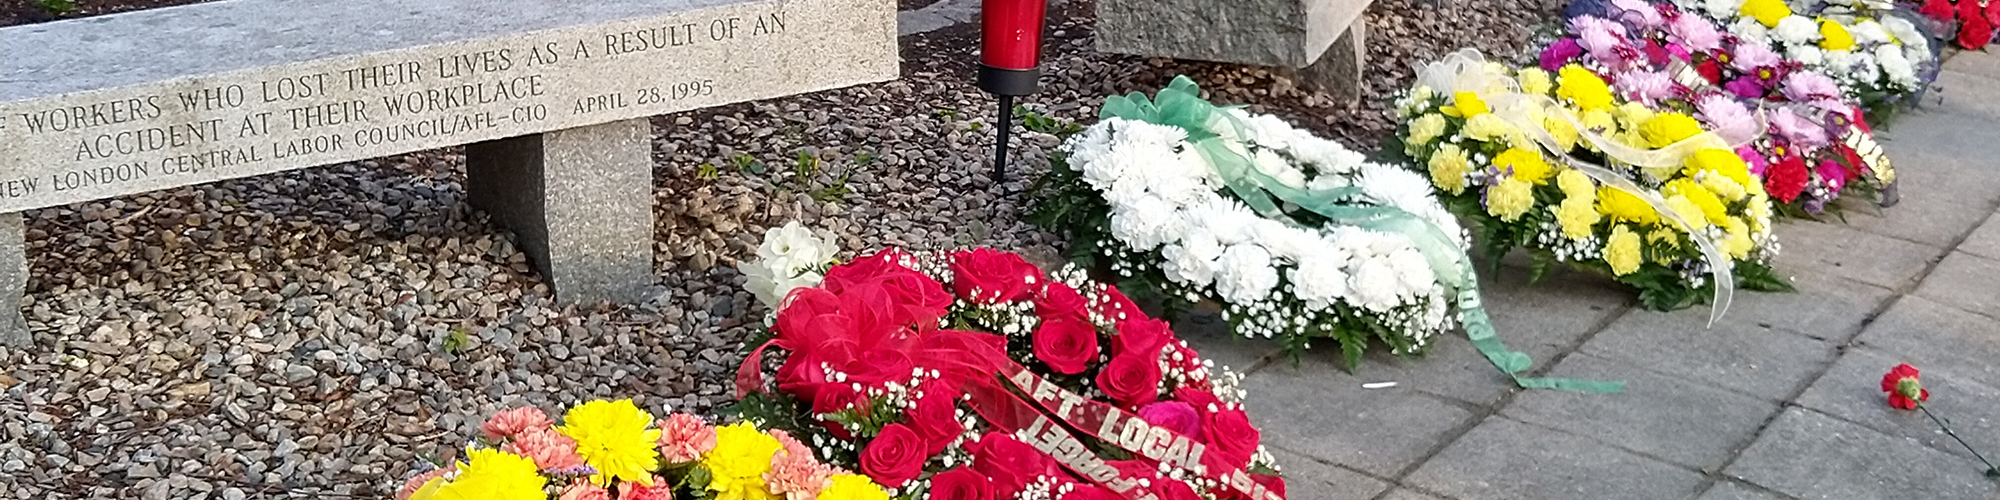 Wreaths that had been layed at the Workers' Memorial site